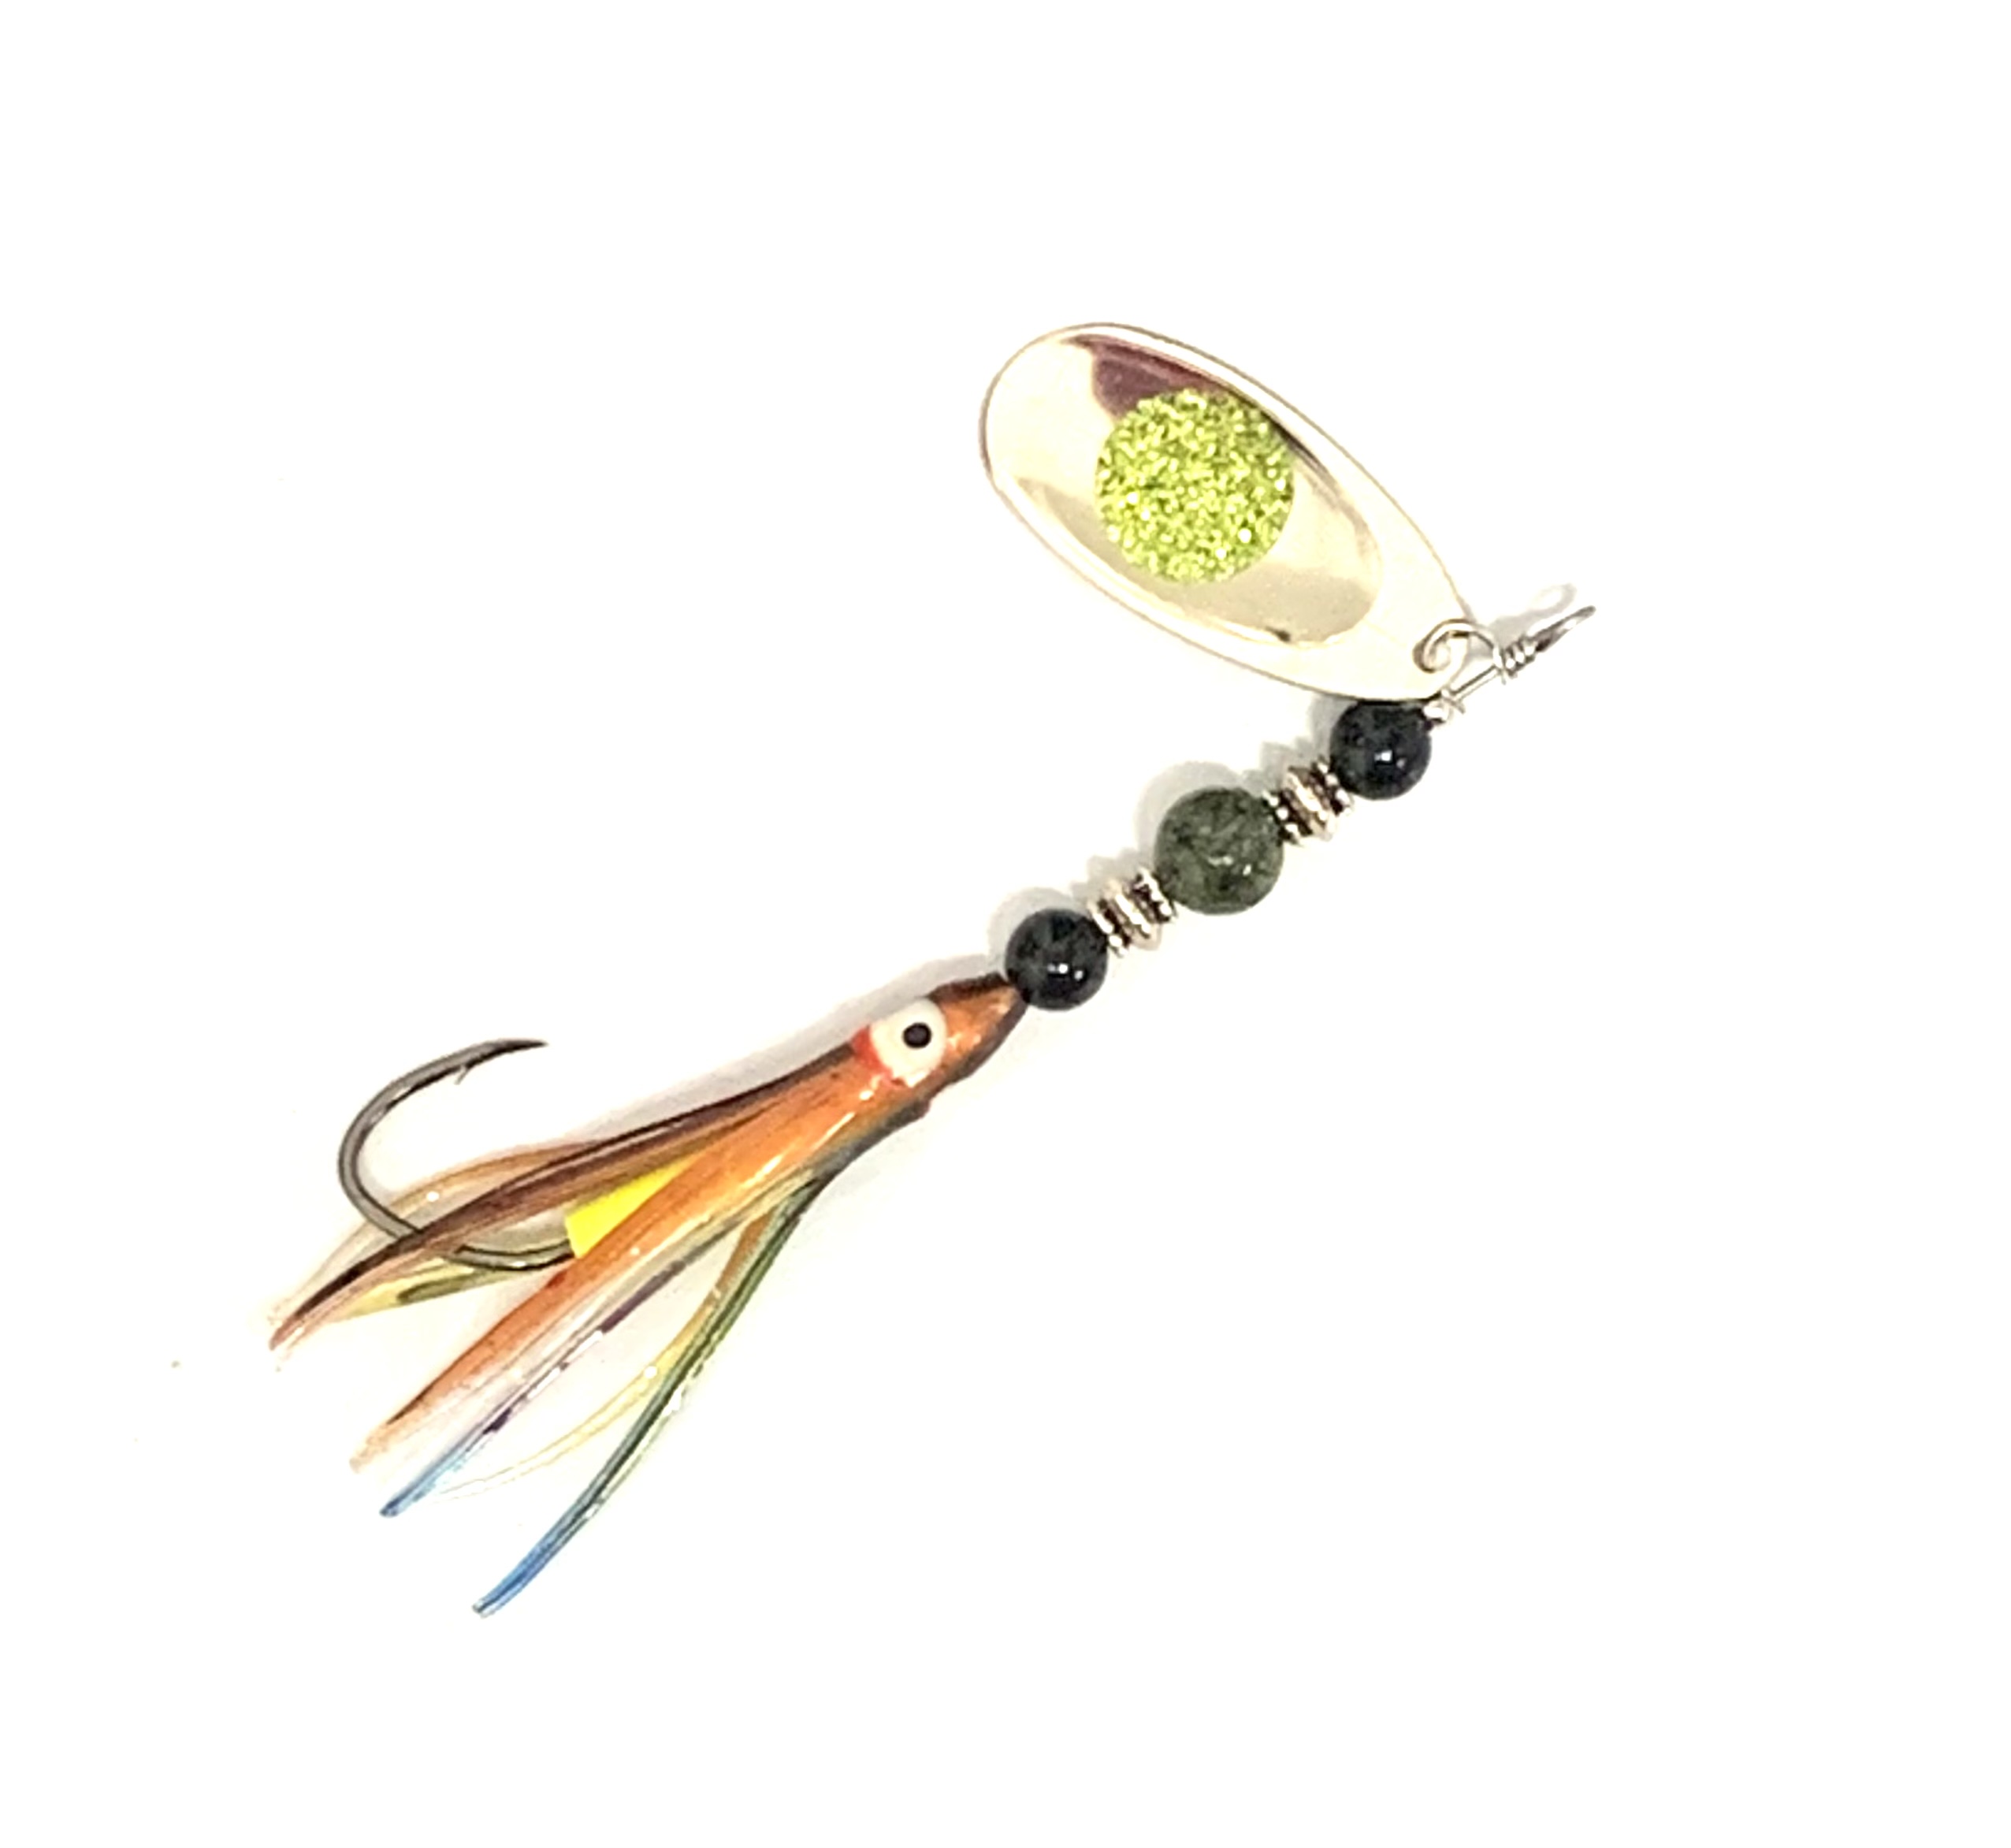 Willow Bug from Brack N Brine with a chartreuse body, black hackle